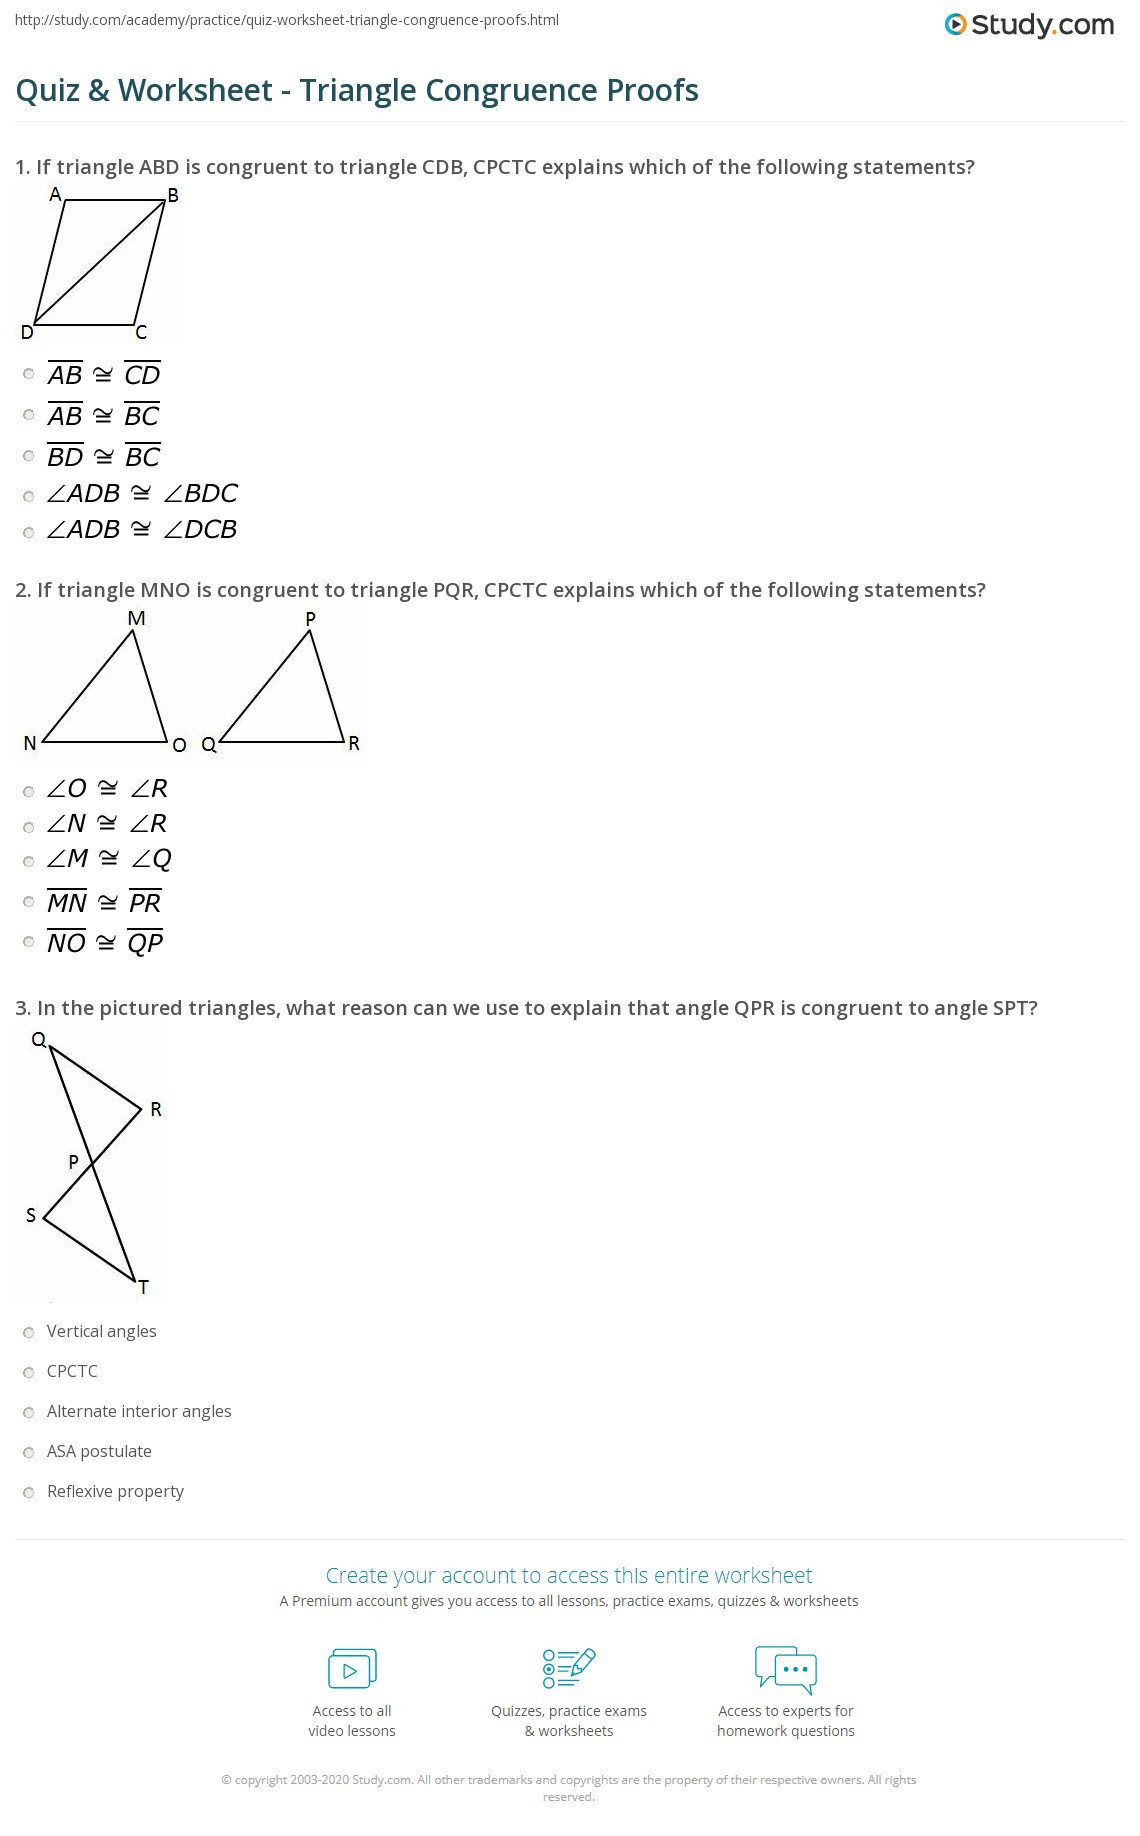 quiz worksheet triangle congruence proofs